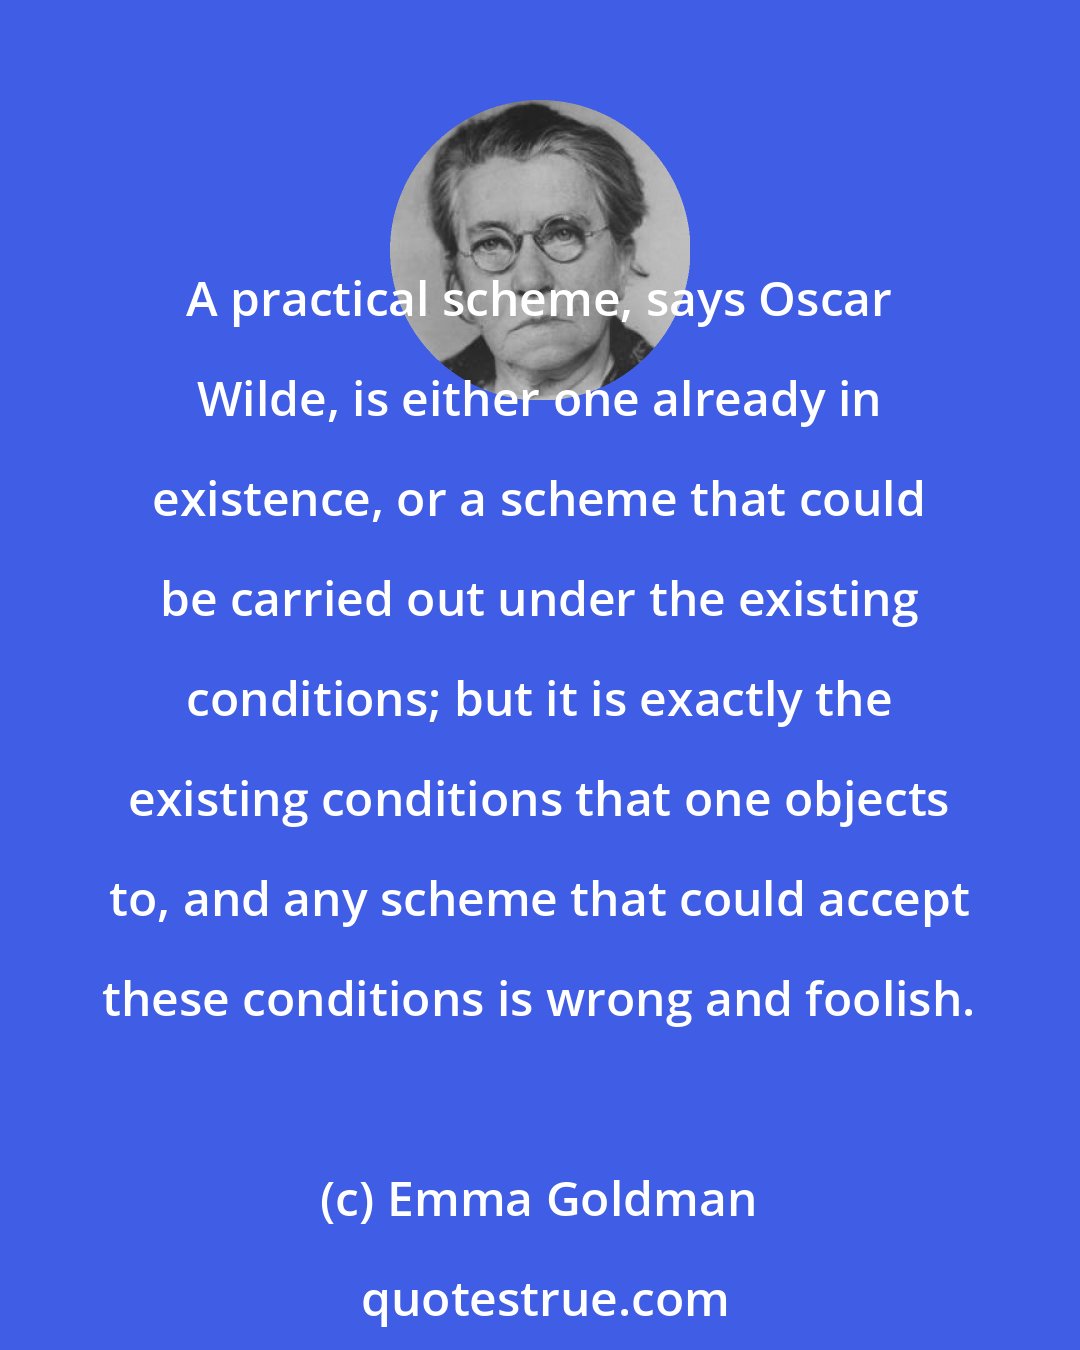 Emma Goldman: A practical scheme, says Oscar Wilde, is either one already in existence, or a scheme that could be carried out under the existing conditions; but it is exactly the existing conditions that one objects to, and any scheme that could accept these conditions is wrong and foolish.